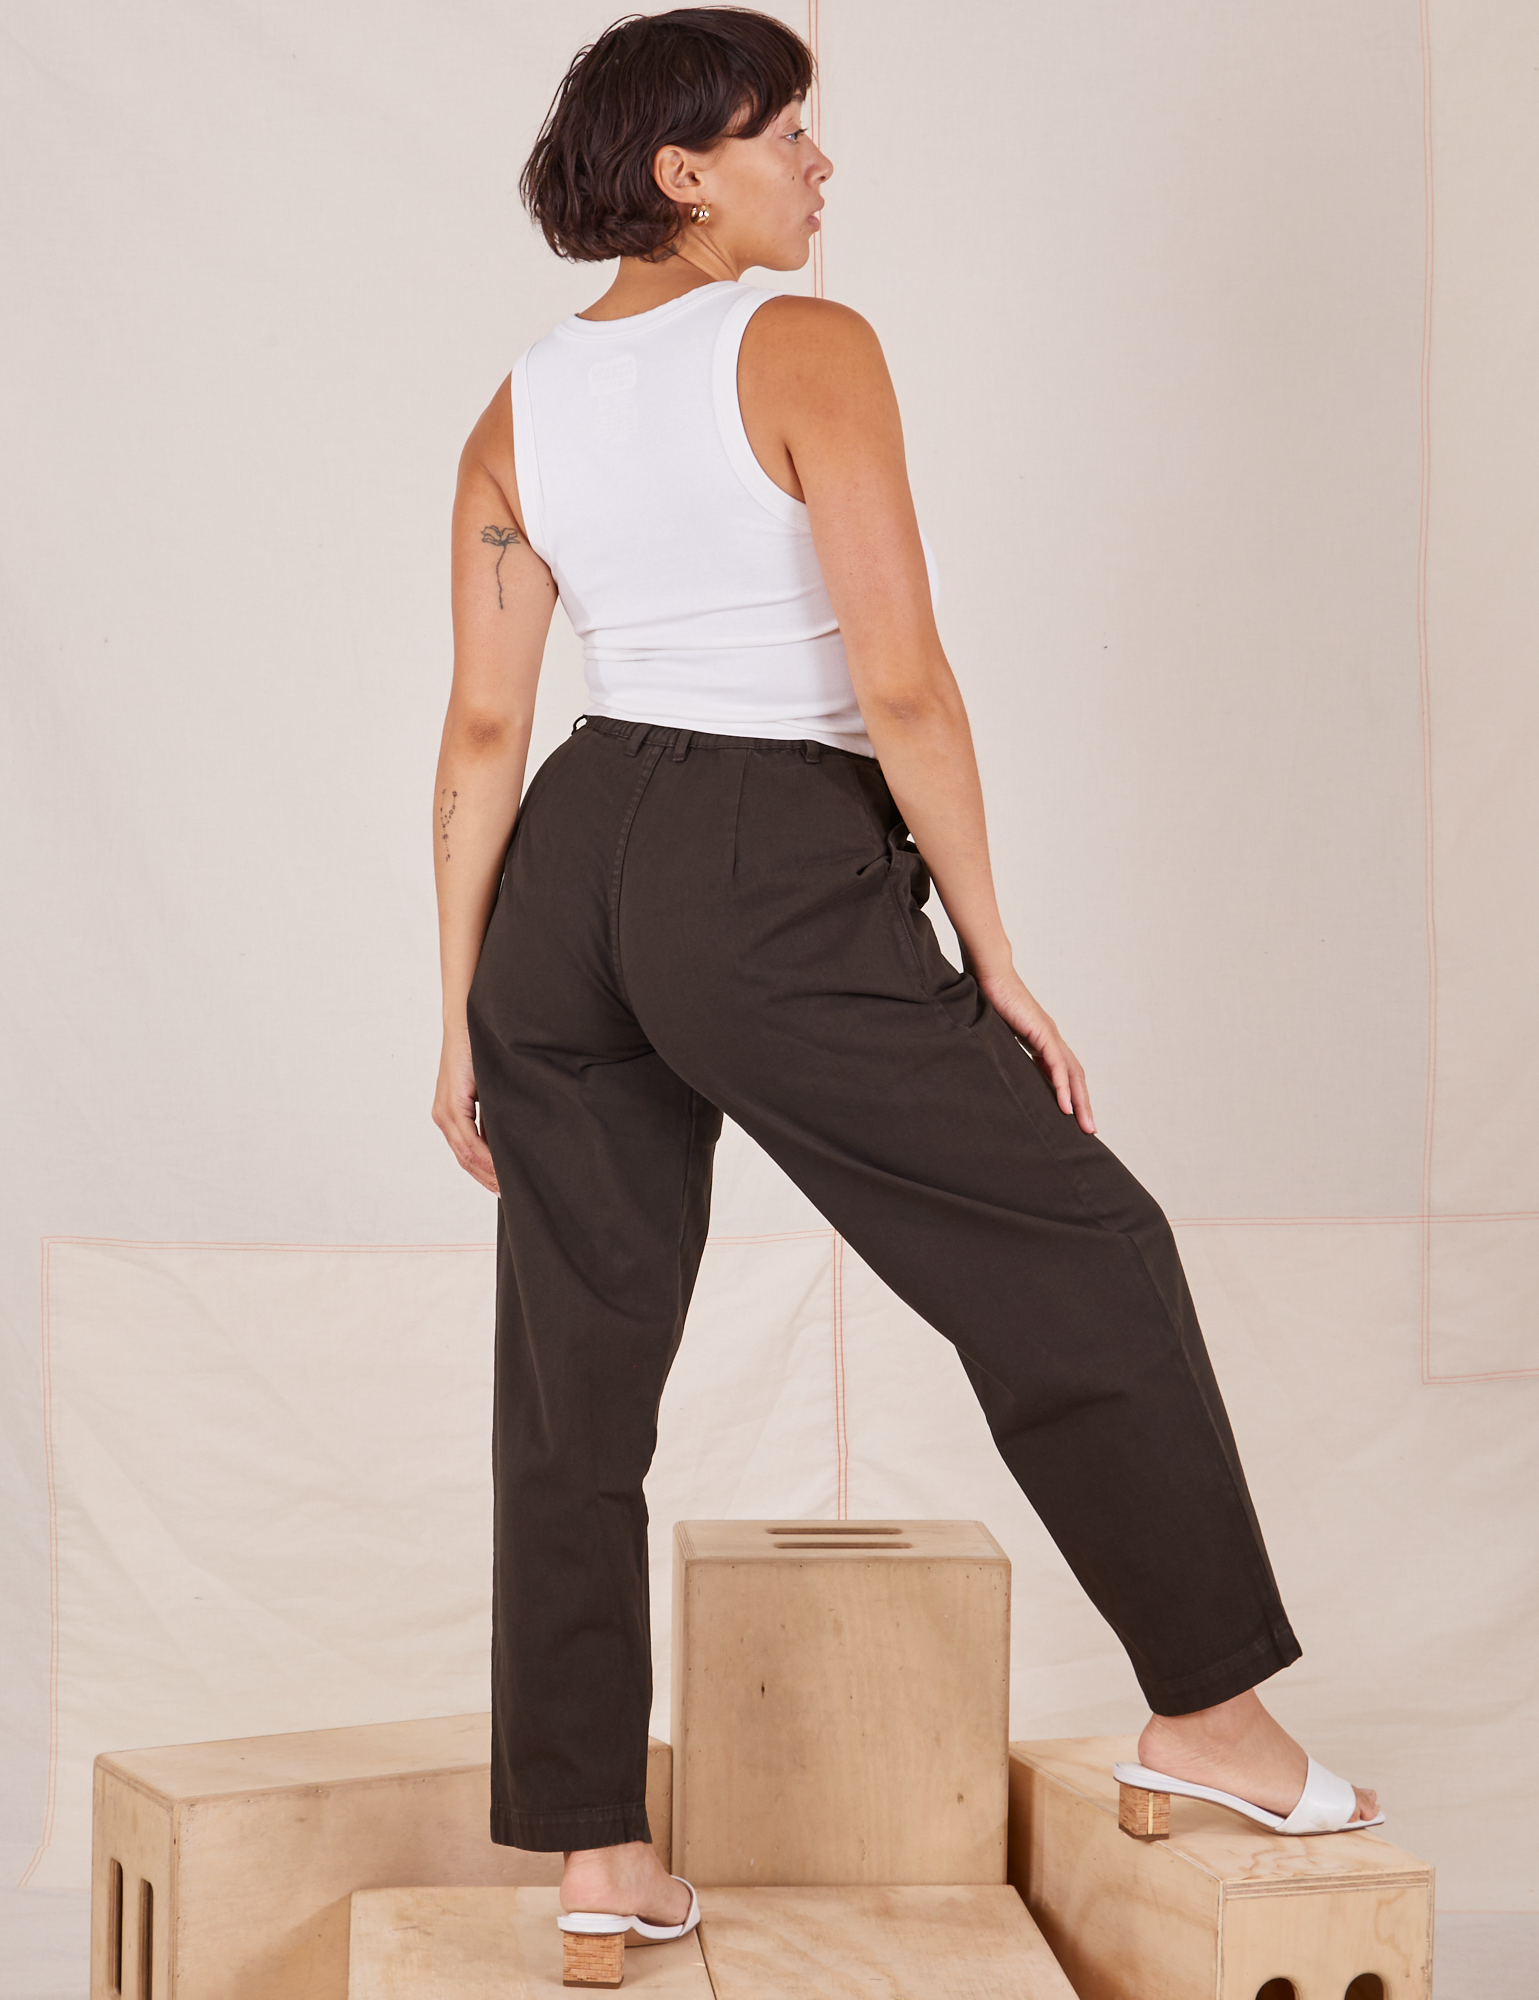 Angled back view of Heavyweight Trousers in Espresso Brown and Cropped Tank Top in vintage tee off-white by Tiara.